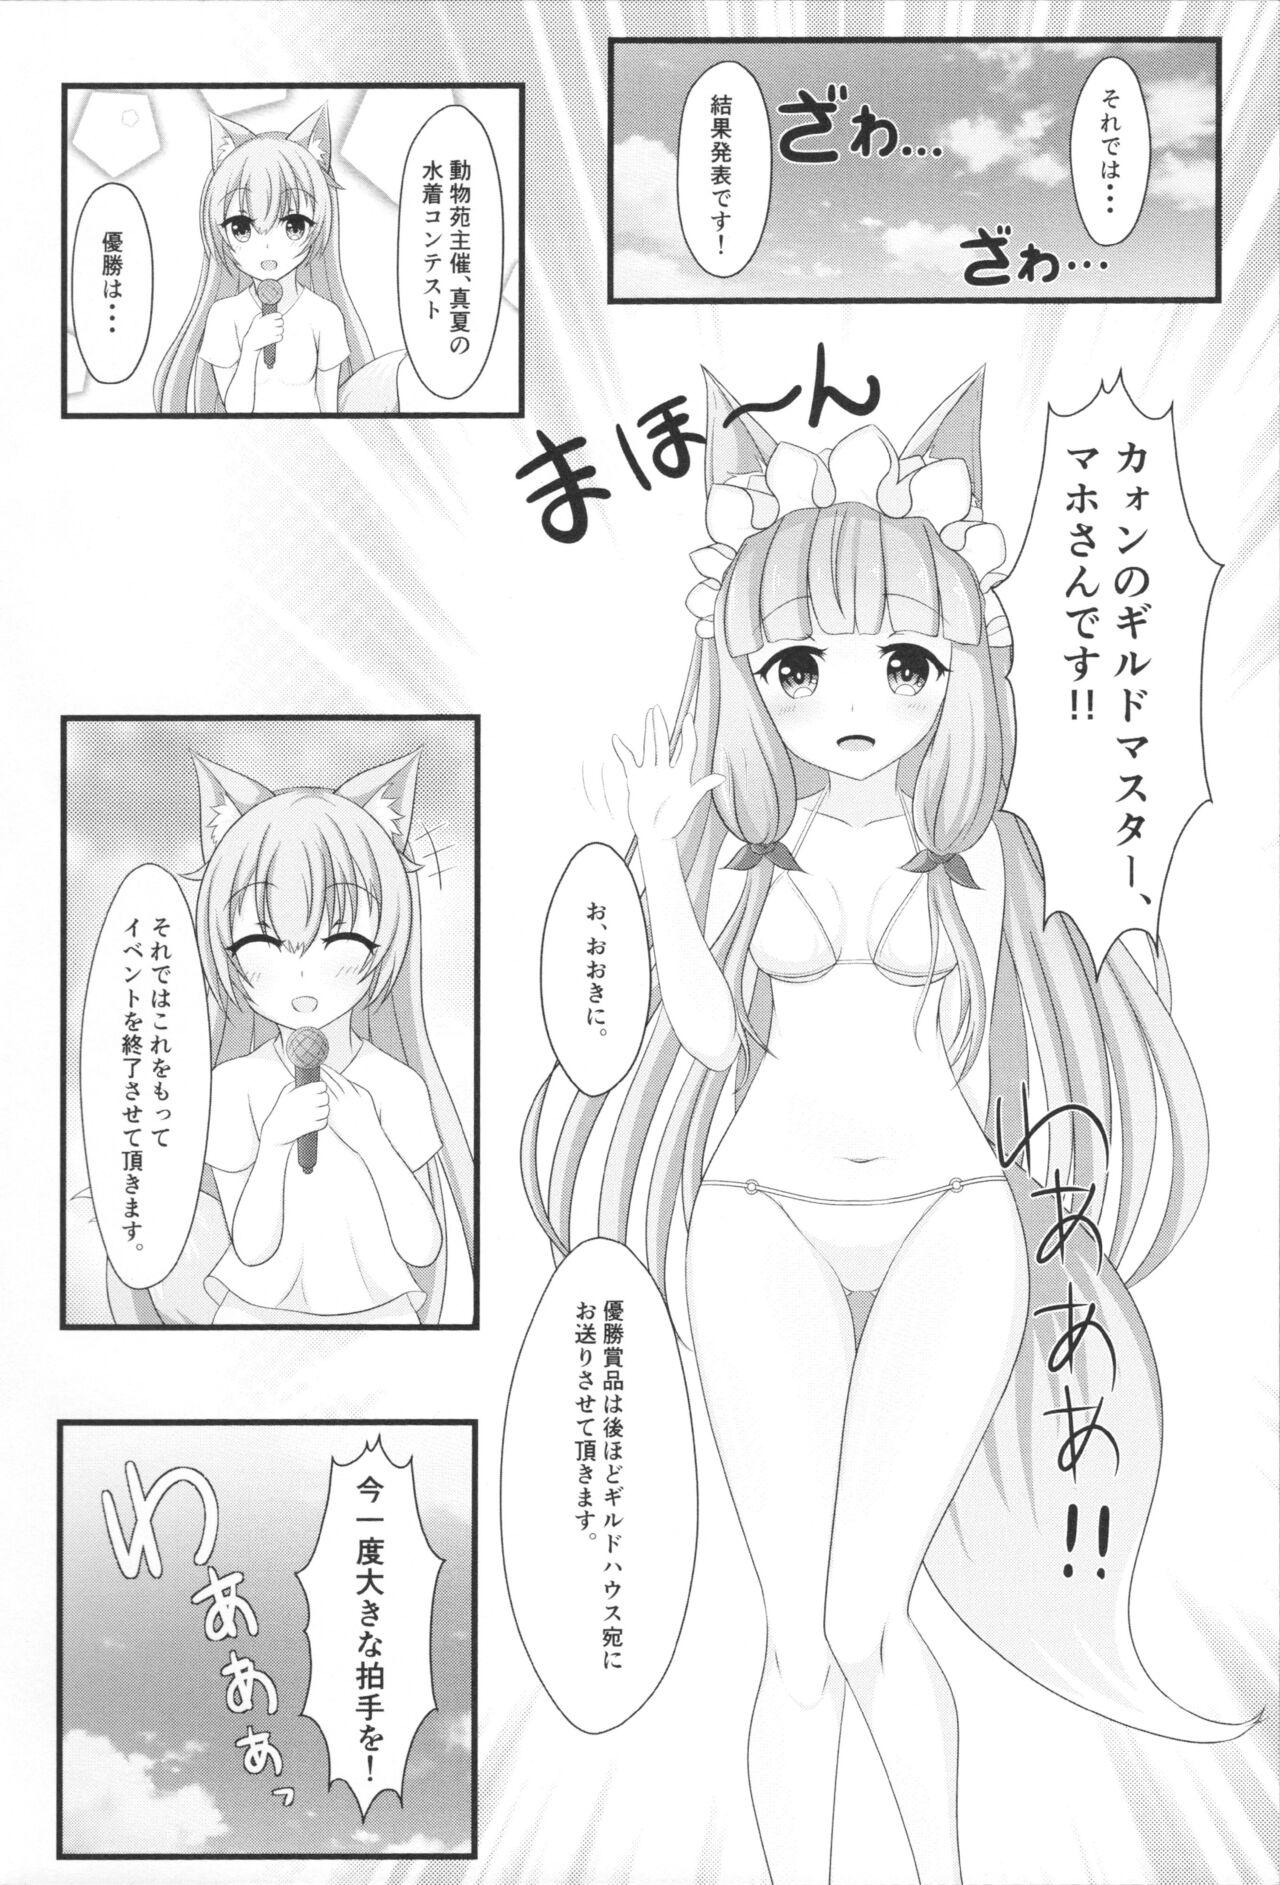 Body Maho Hime Connect! 2 - Princess connect Role Play - Page 6